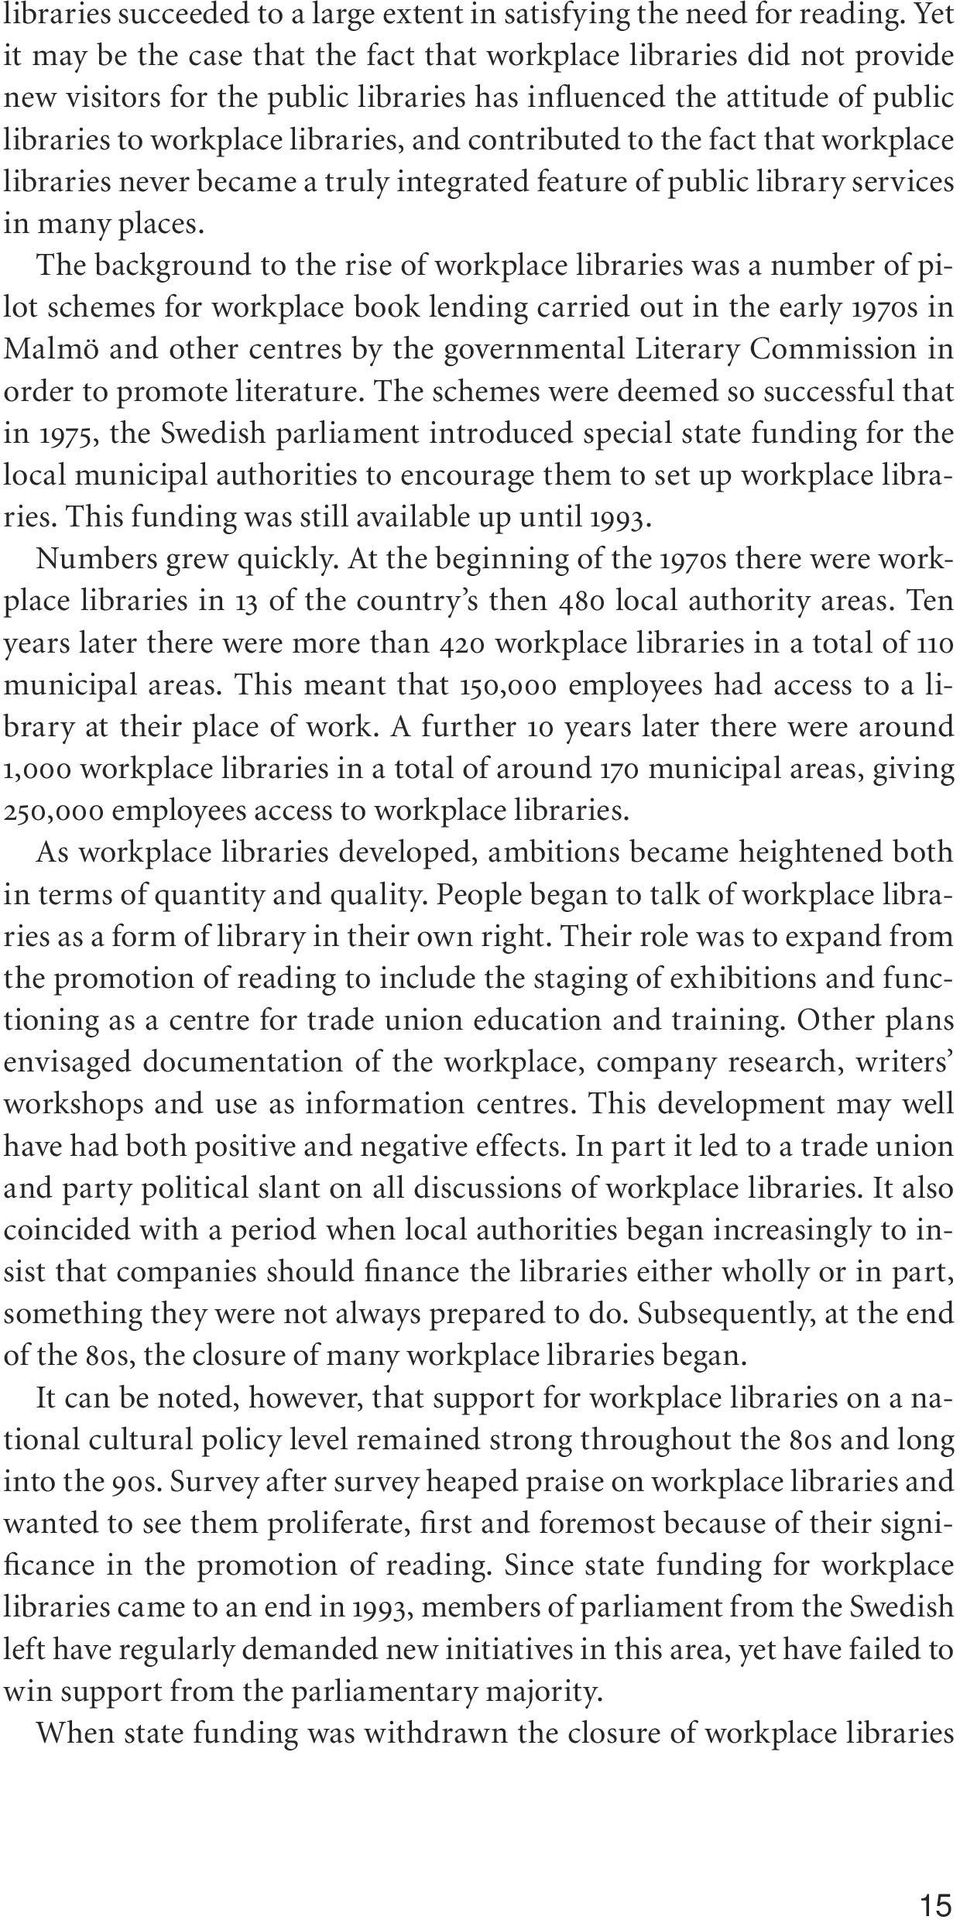 contributed to the fact that workplace libraries never became a truly integrated feature of public library services in many places.